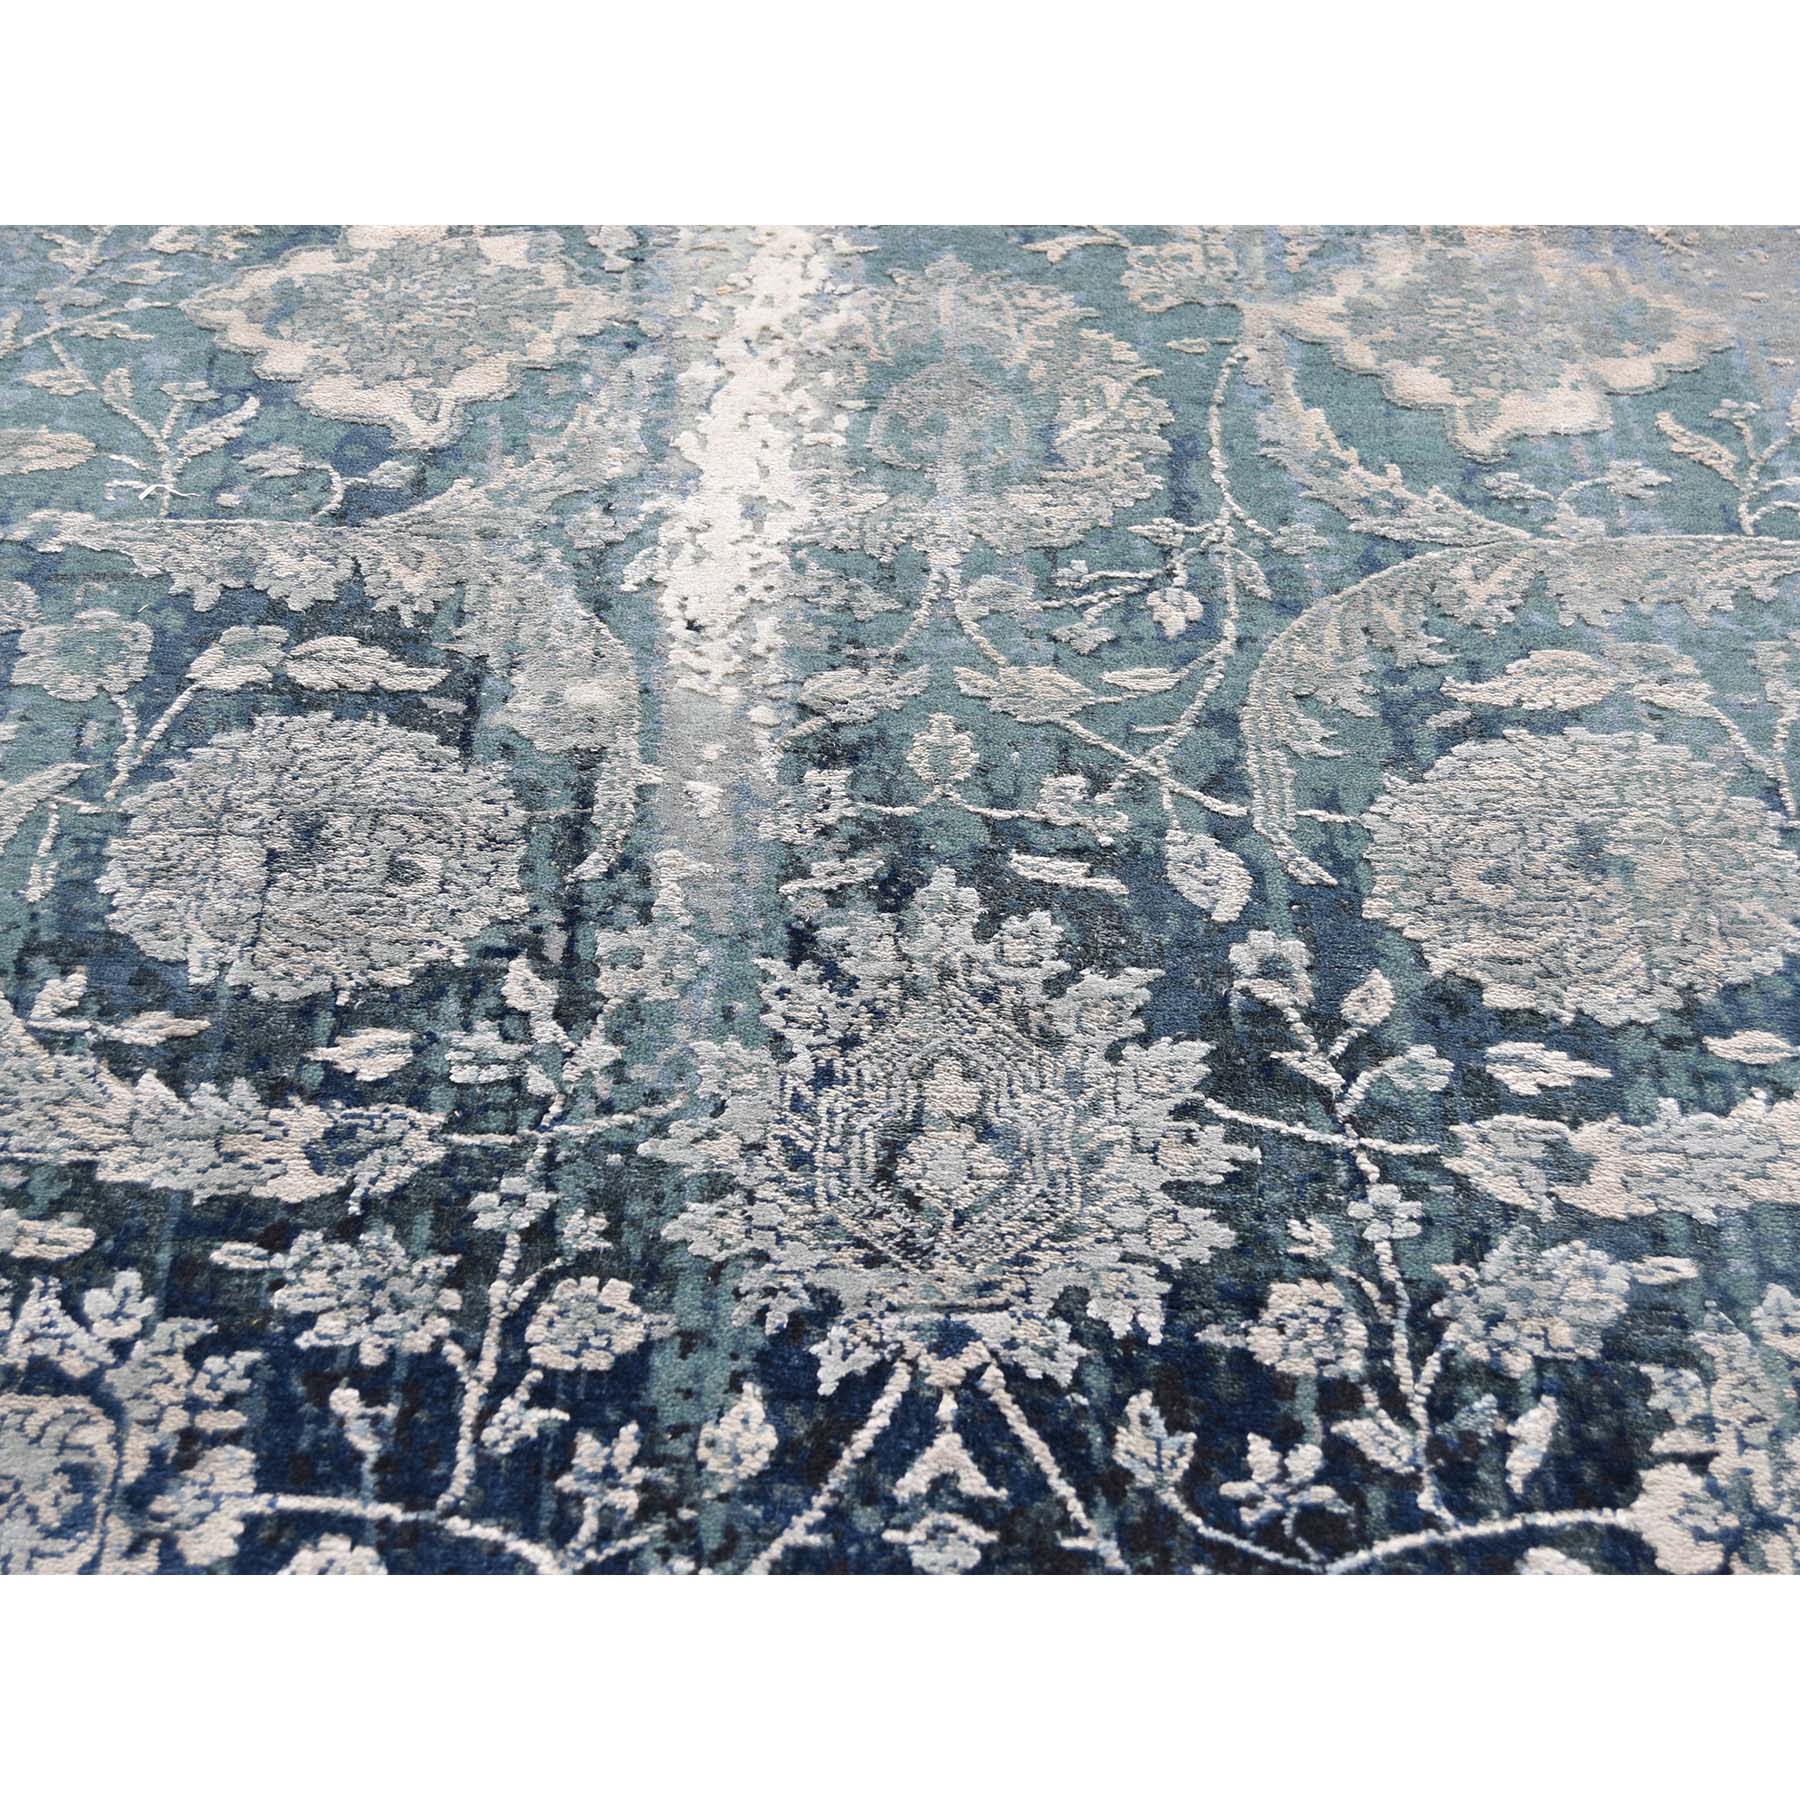 6-x9-2  Blue Persian Tabriz Erased Design Wool And Silk Hand-Knotted Oriental Rug 